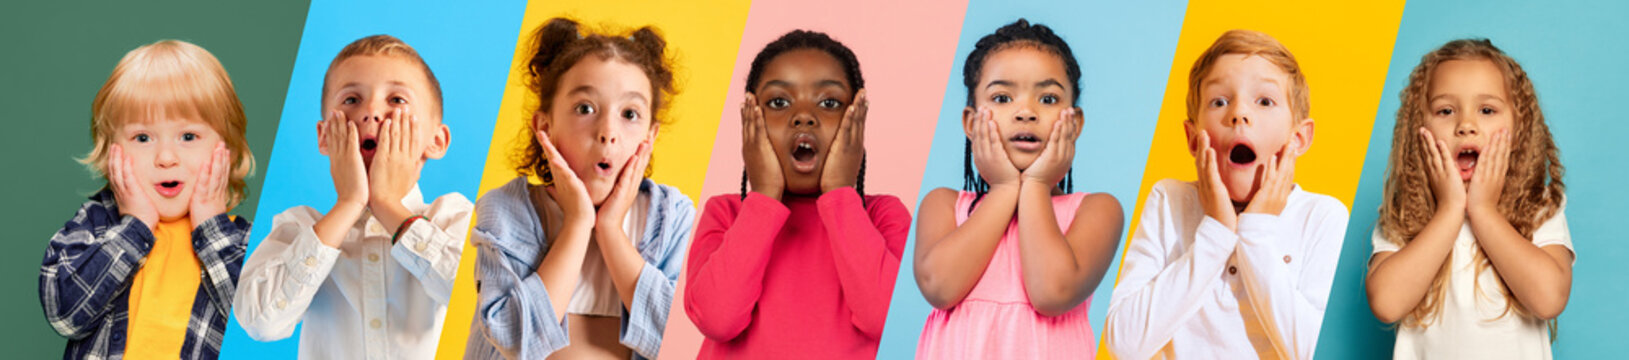 Collage made of portraits of different little children, boys ad girls expressing shock and surprise over multicolored background. Concept of childhood, emotions, lifestyle, friendship